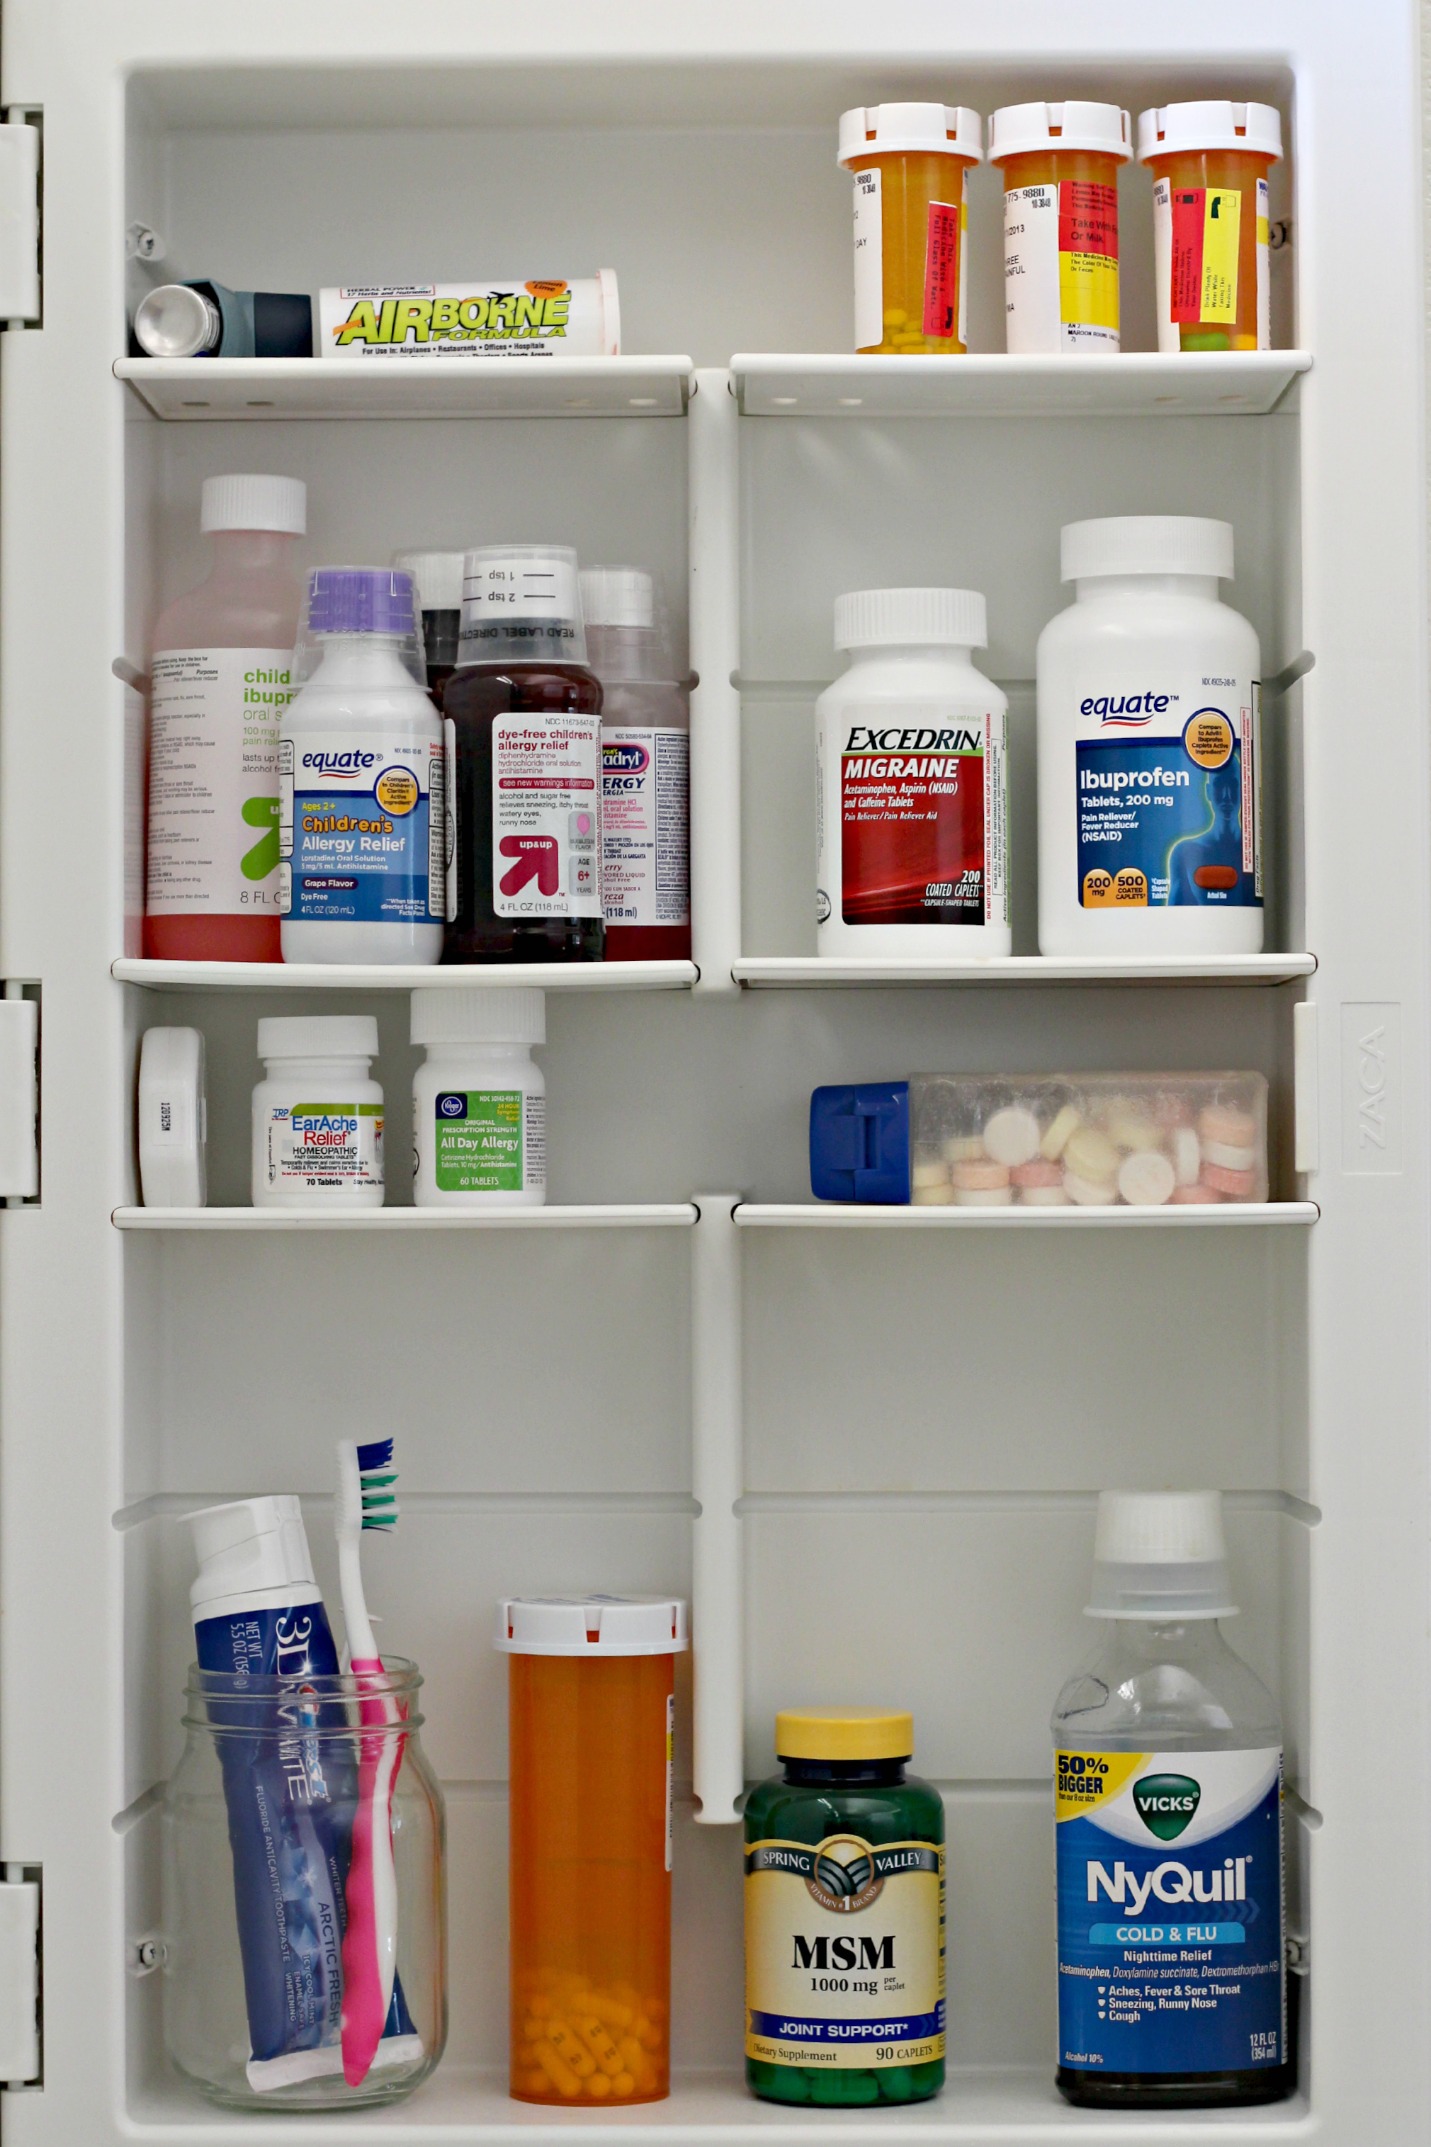 Easy Steps to an Organized Life in 31 Days: Medicine Cabinet (Day